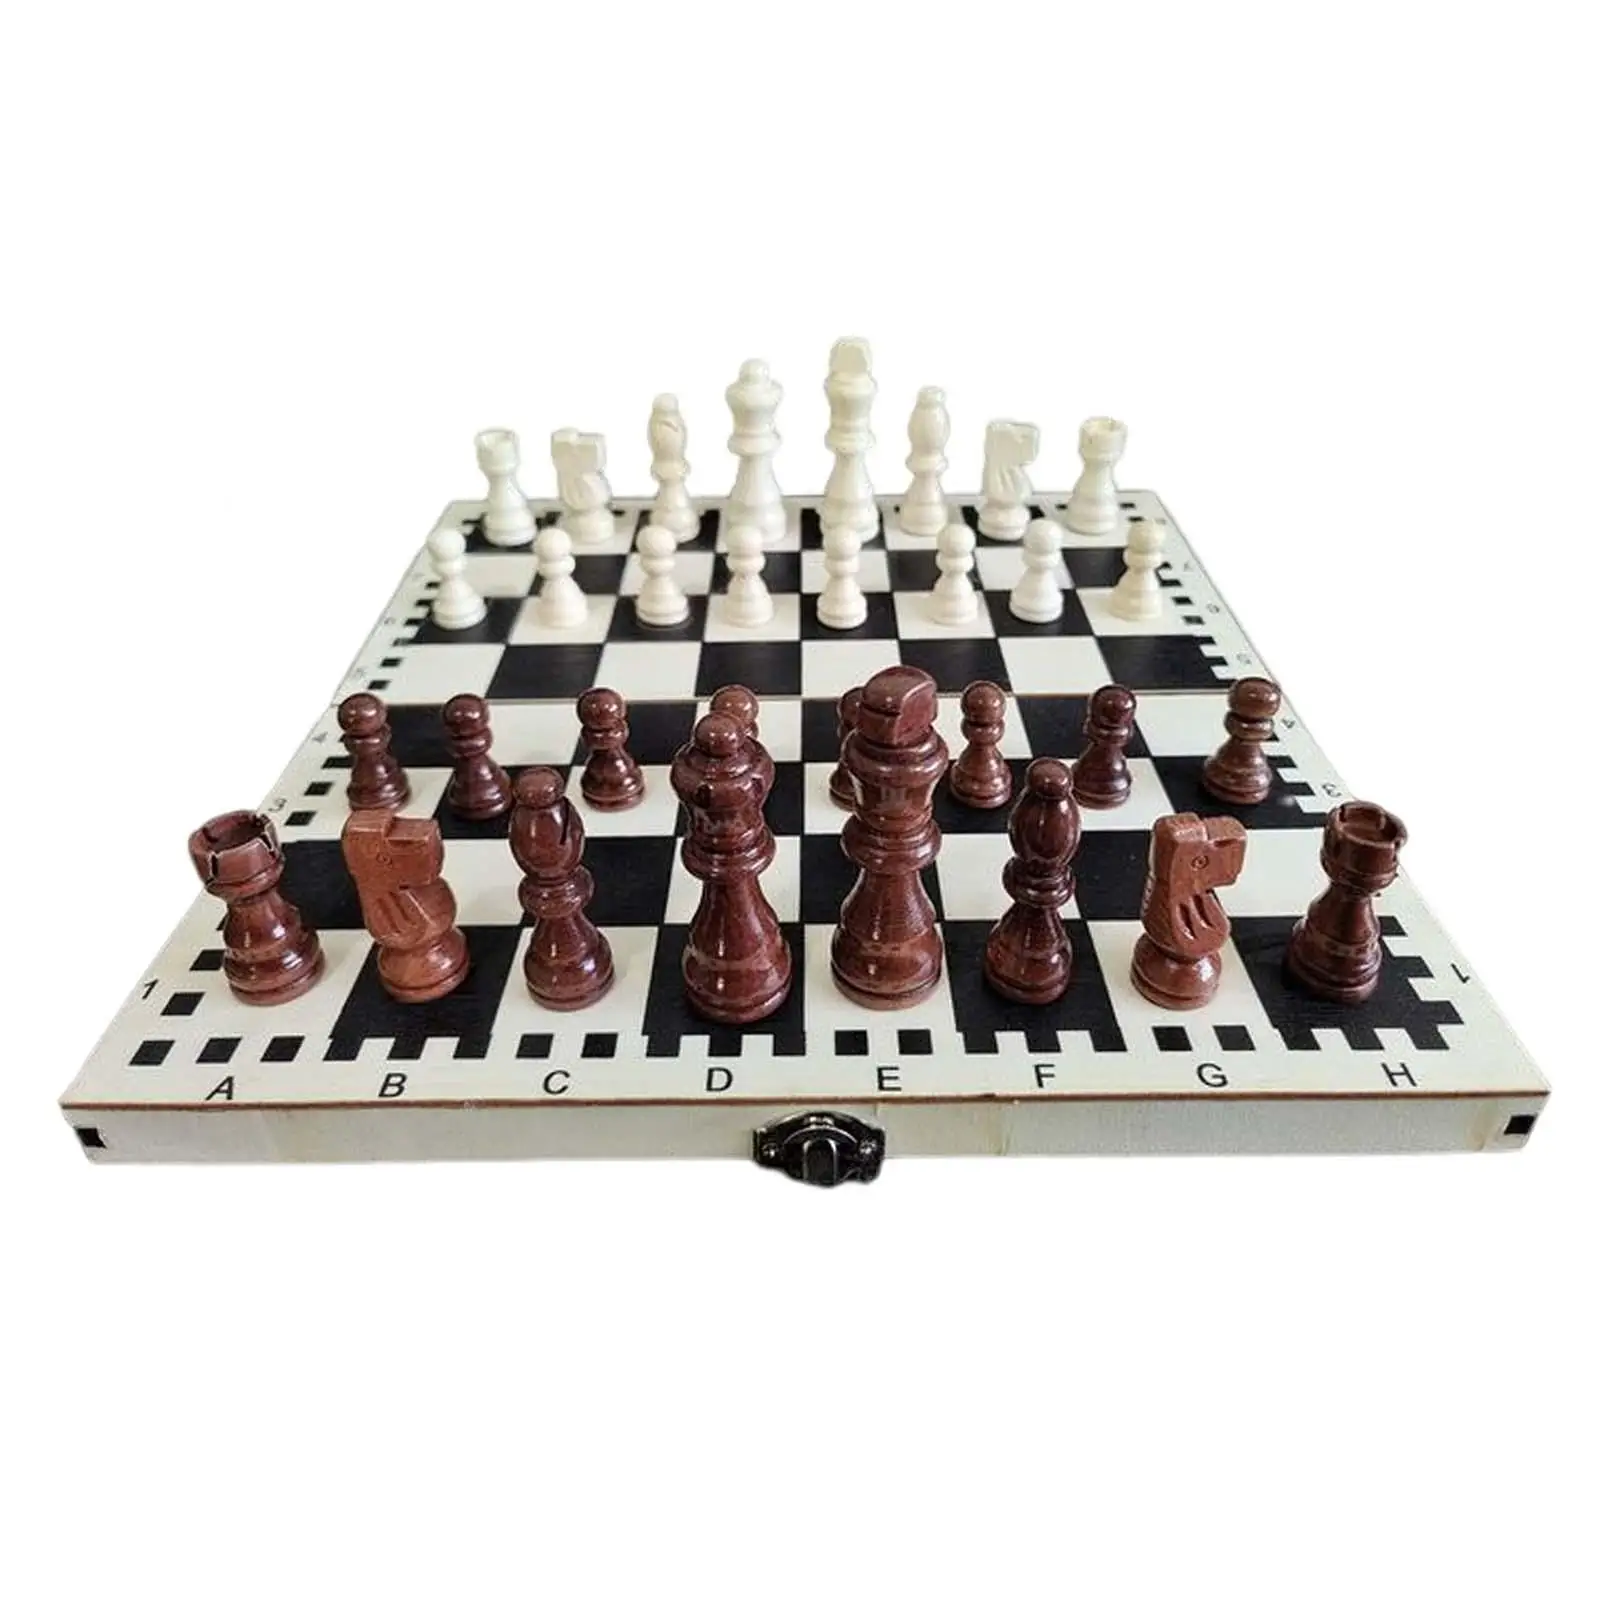 

Wooden Folding Board Chess Set 30x30cm for Kids Adult with Integrated Storage Compartment to Store Chess Pieces Lightweight